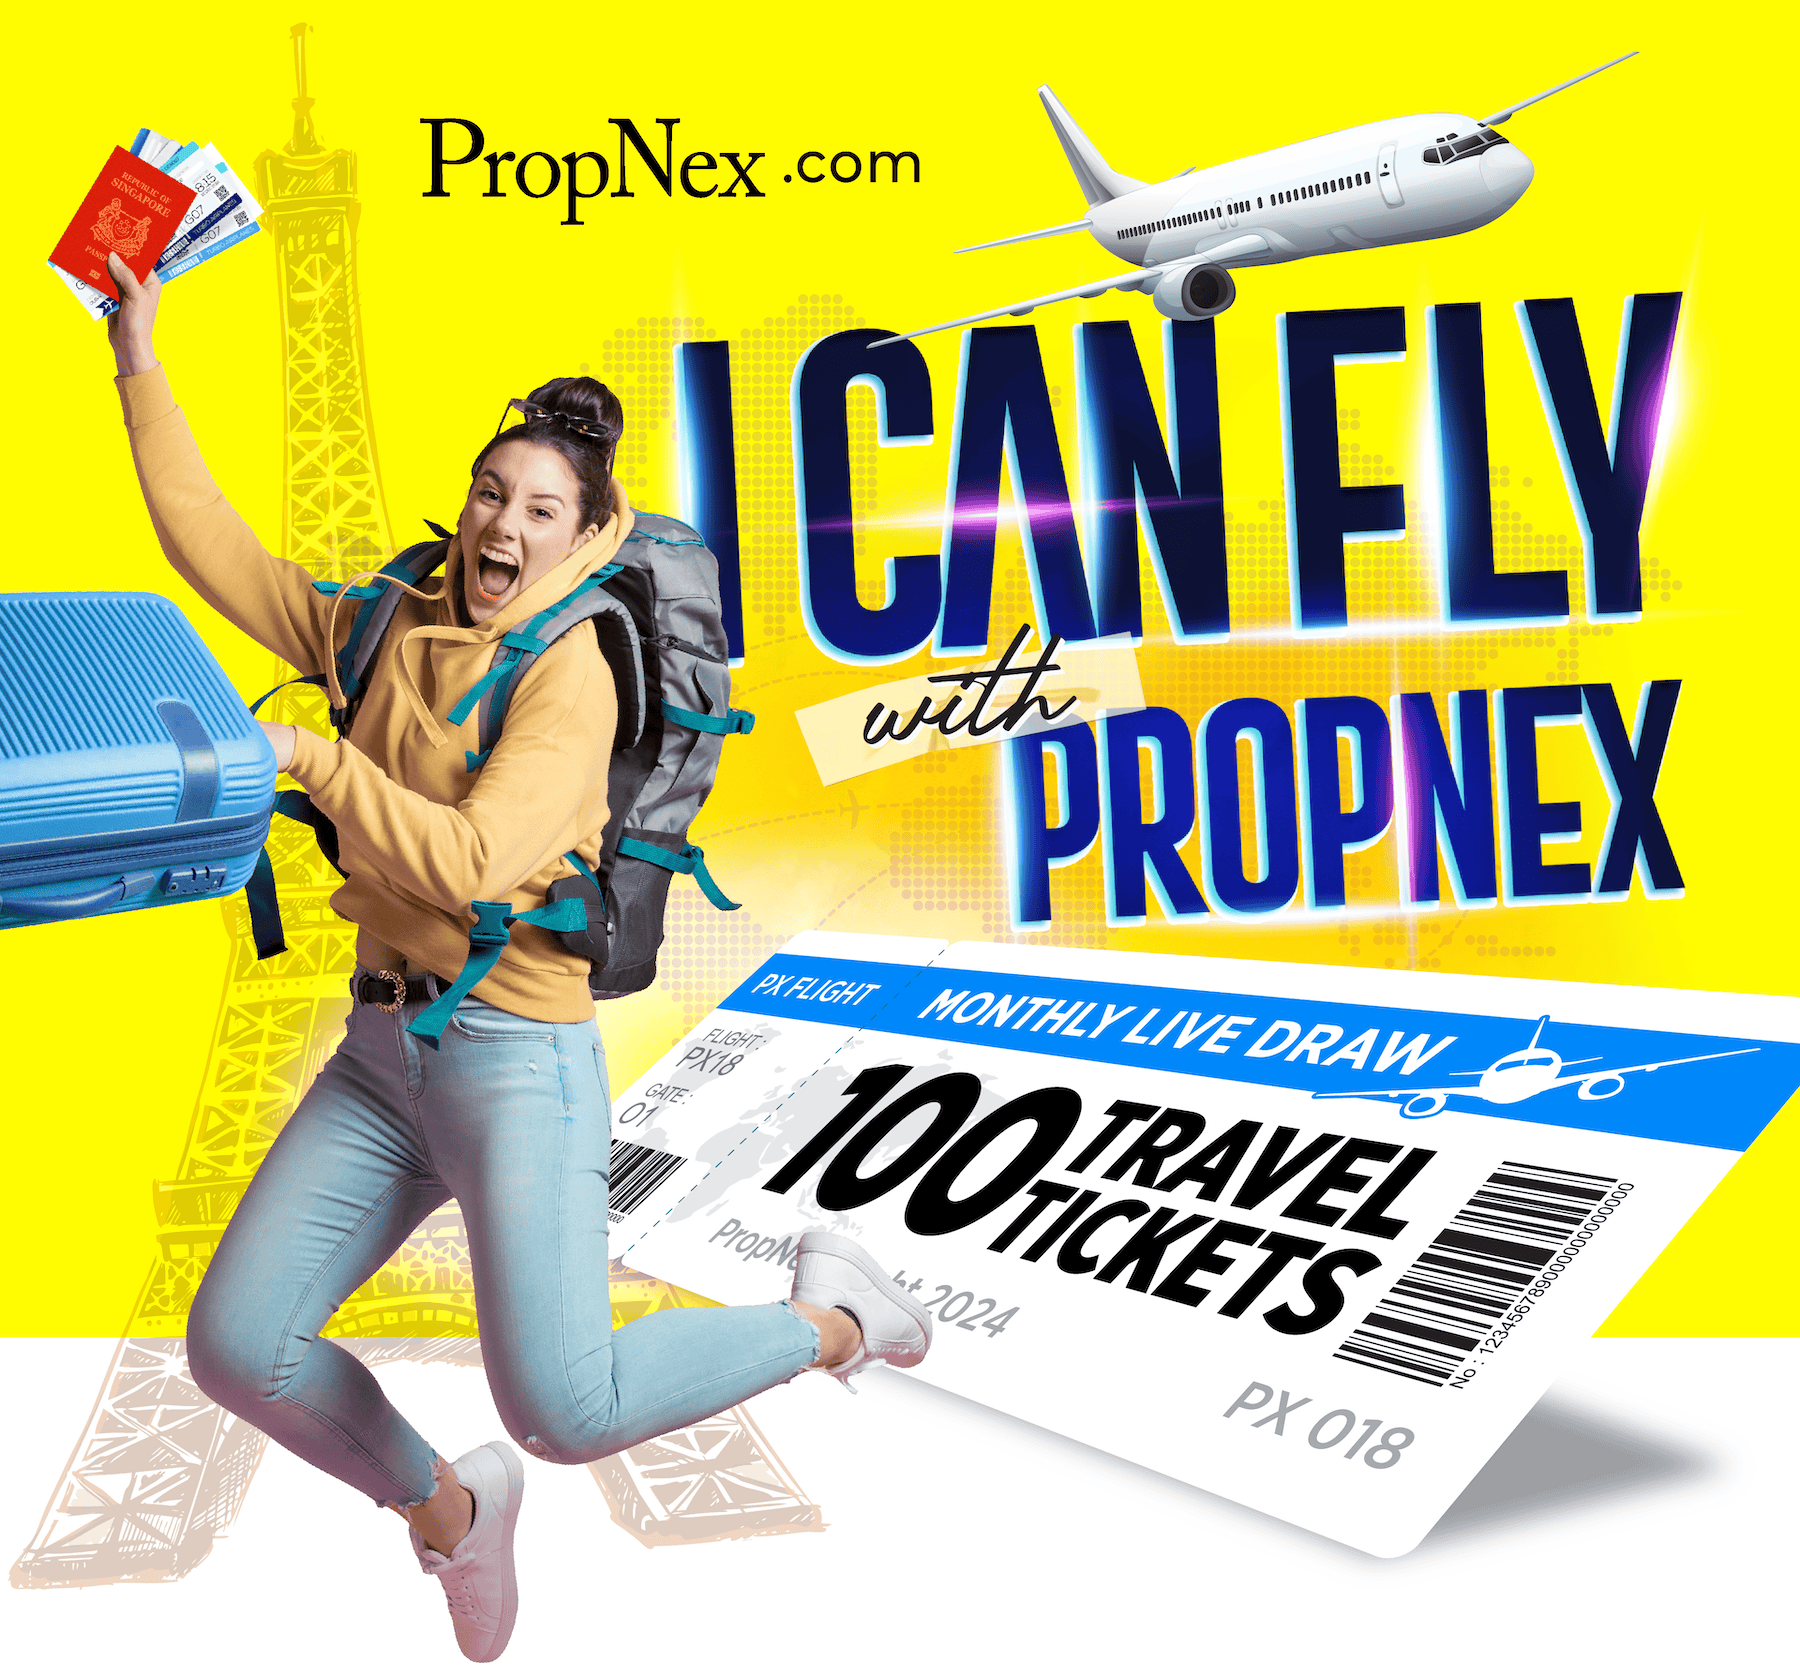 icanfly propnex